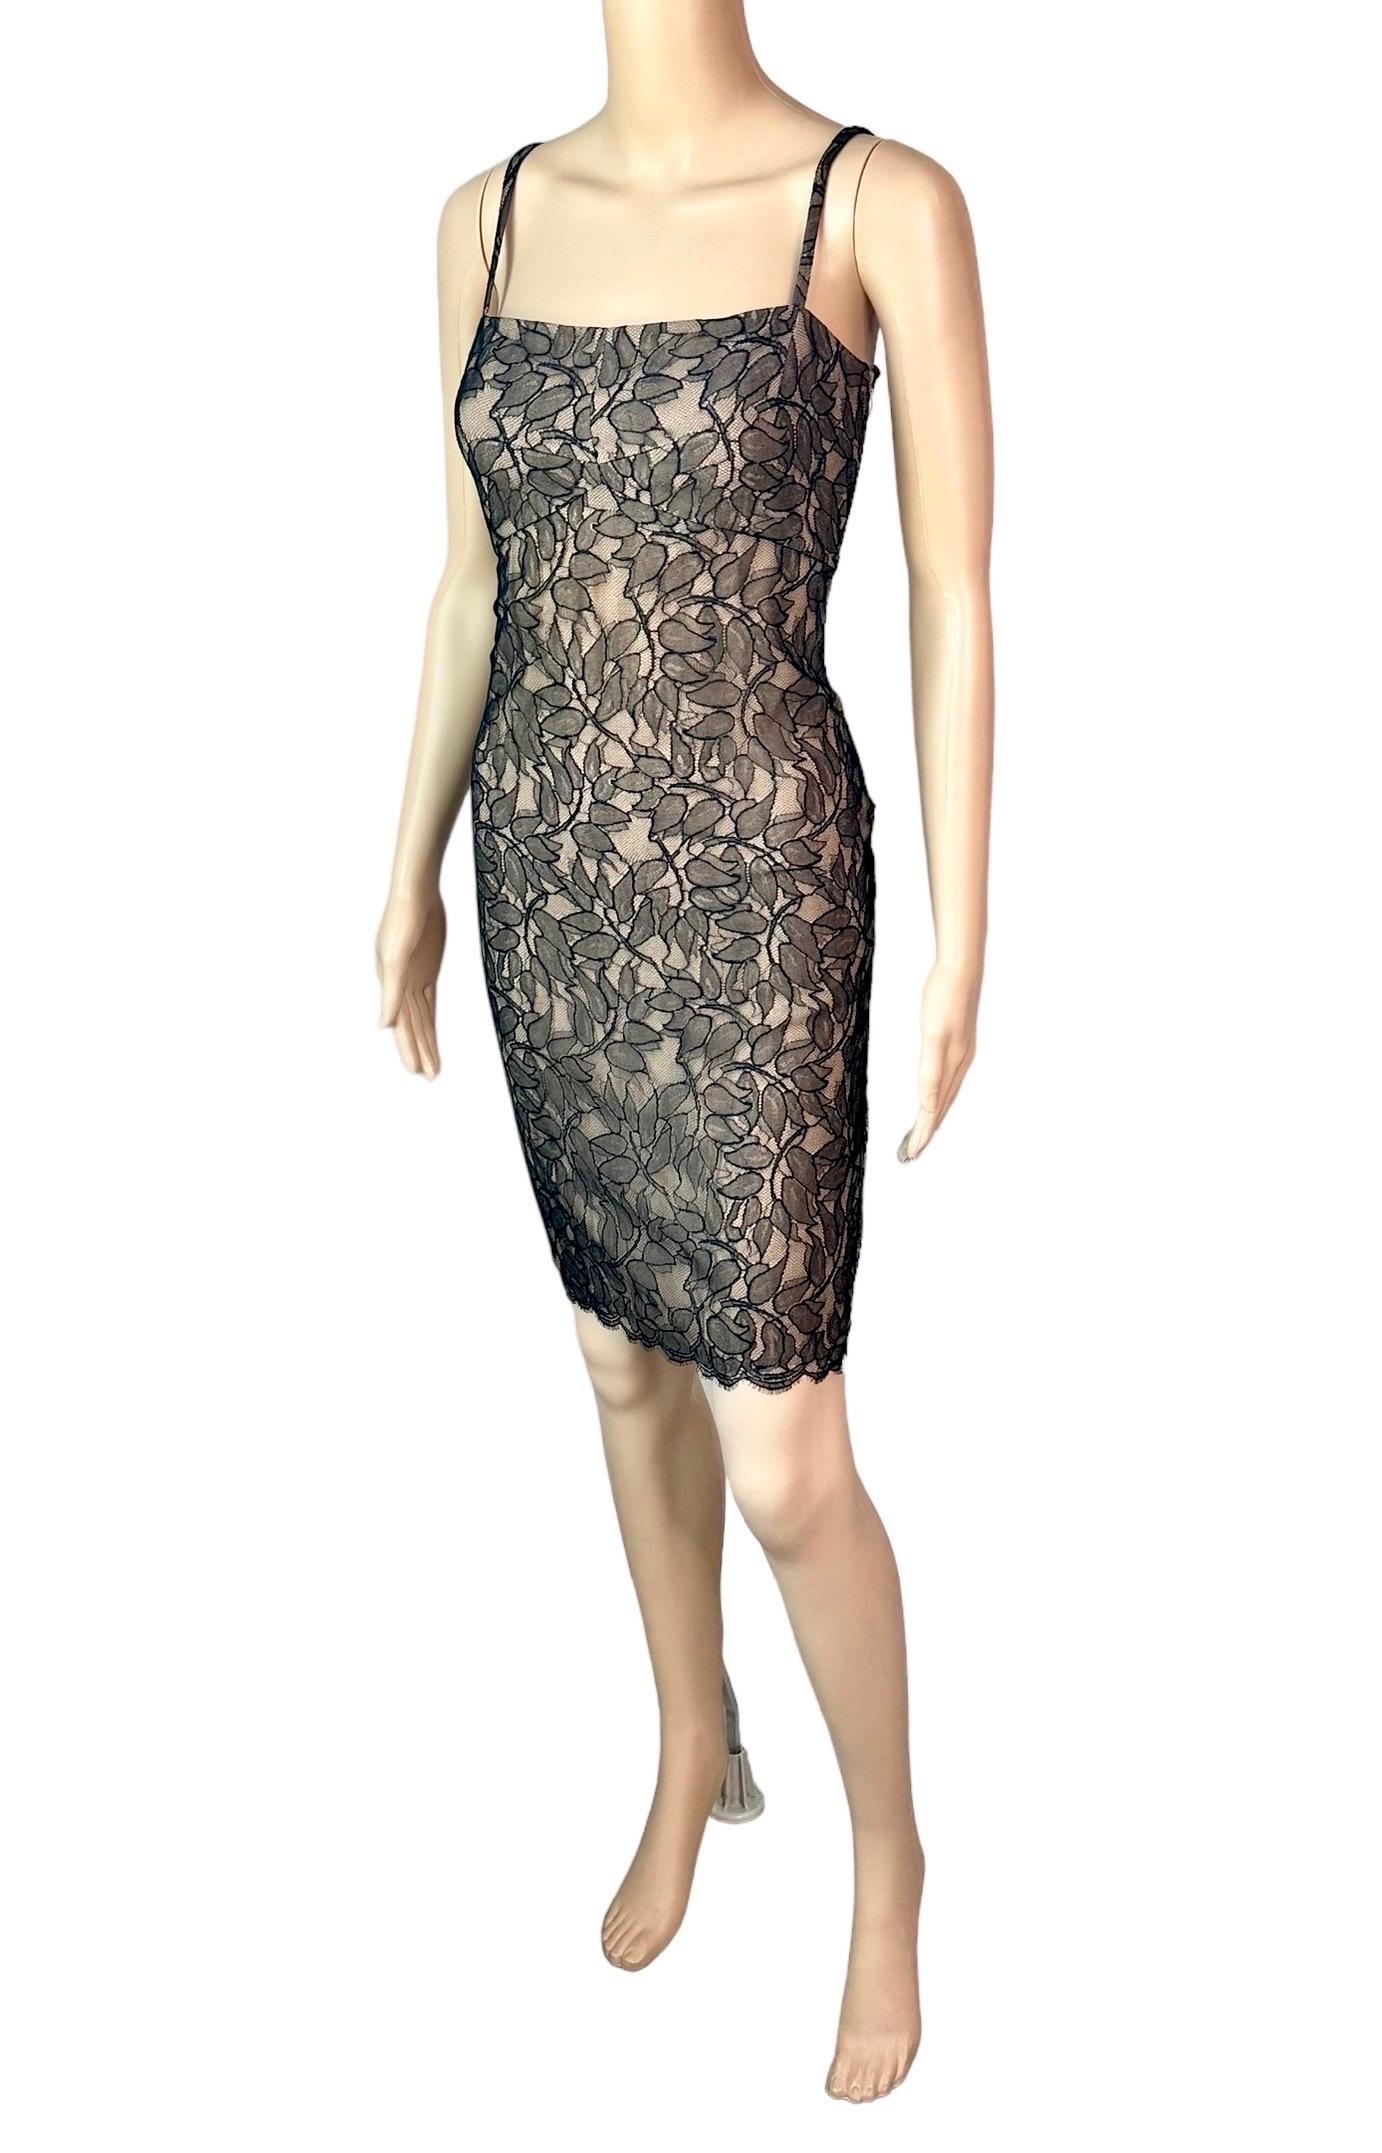 Gianni Versace Istante c. 1998 Sheer Lace Mini Dress For Sale 2